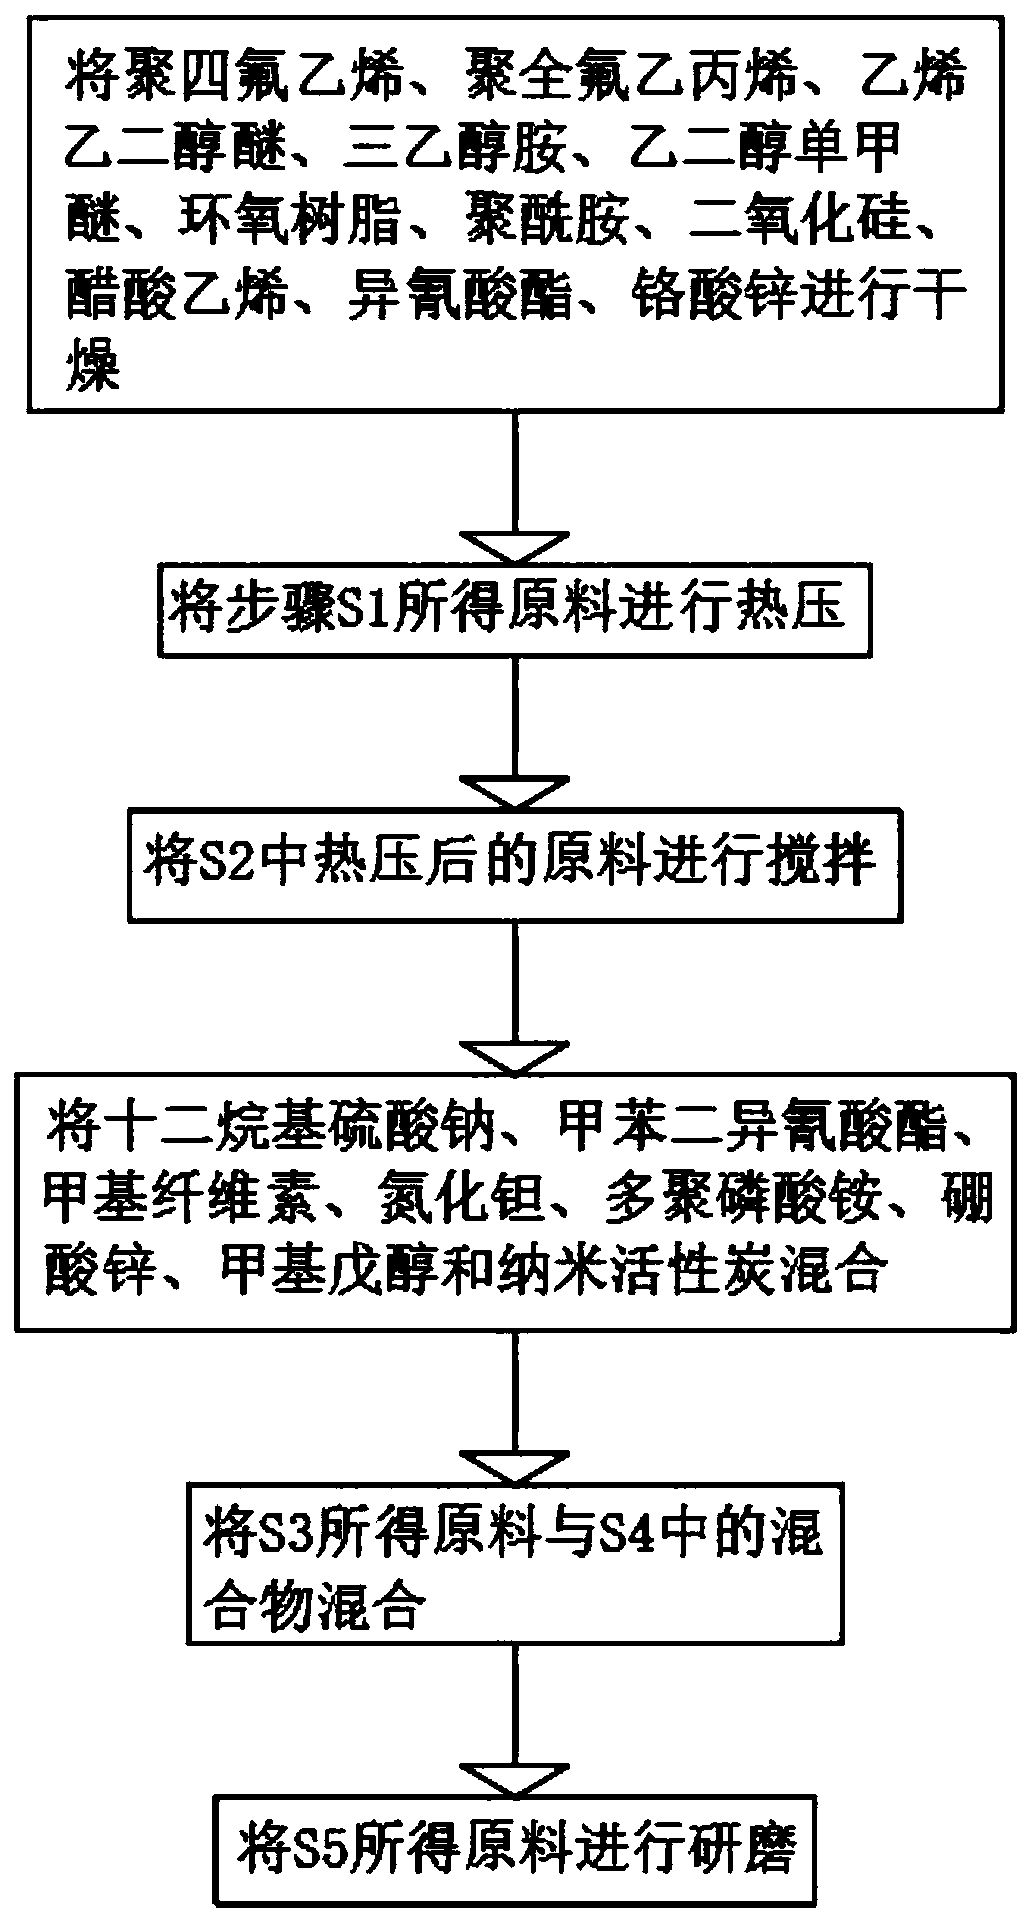 Preparation method and equipment of anti-oxidation and anti-discoloration water-based automobile coating